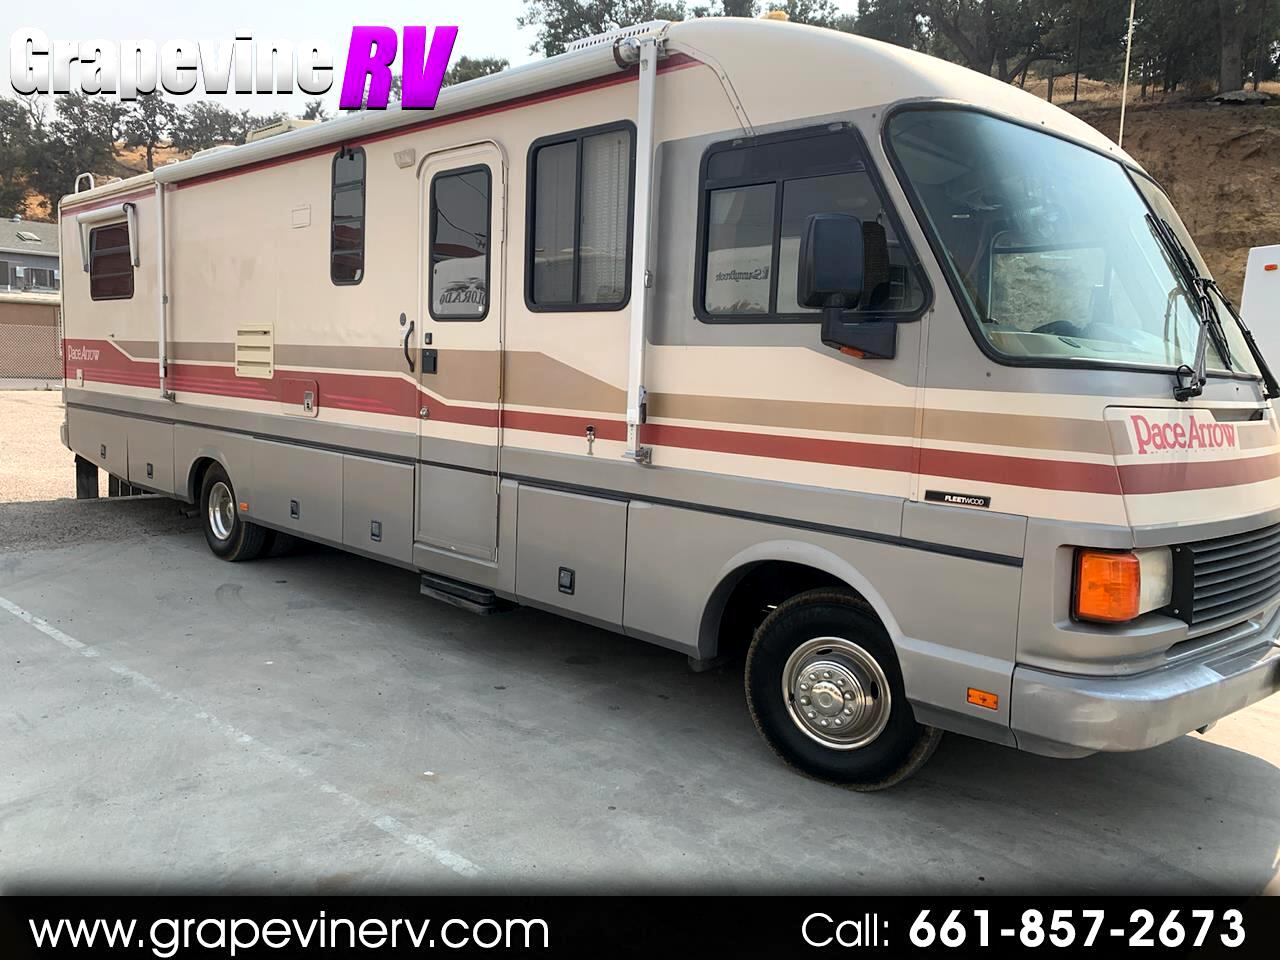 Used 1993 Fleetwood Pace Arrow for Sale in Lebec CA 93243 Grapevine RV